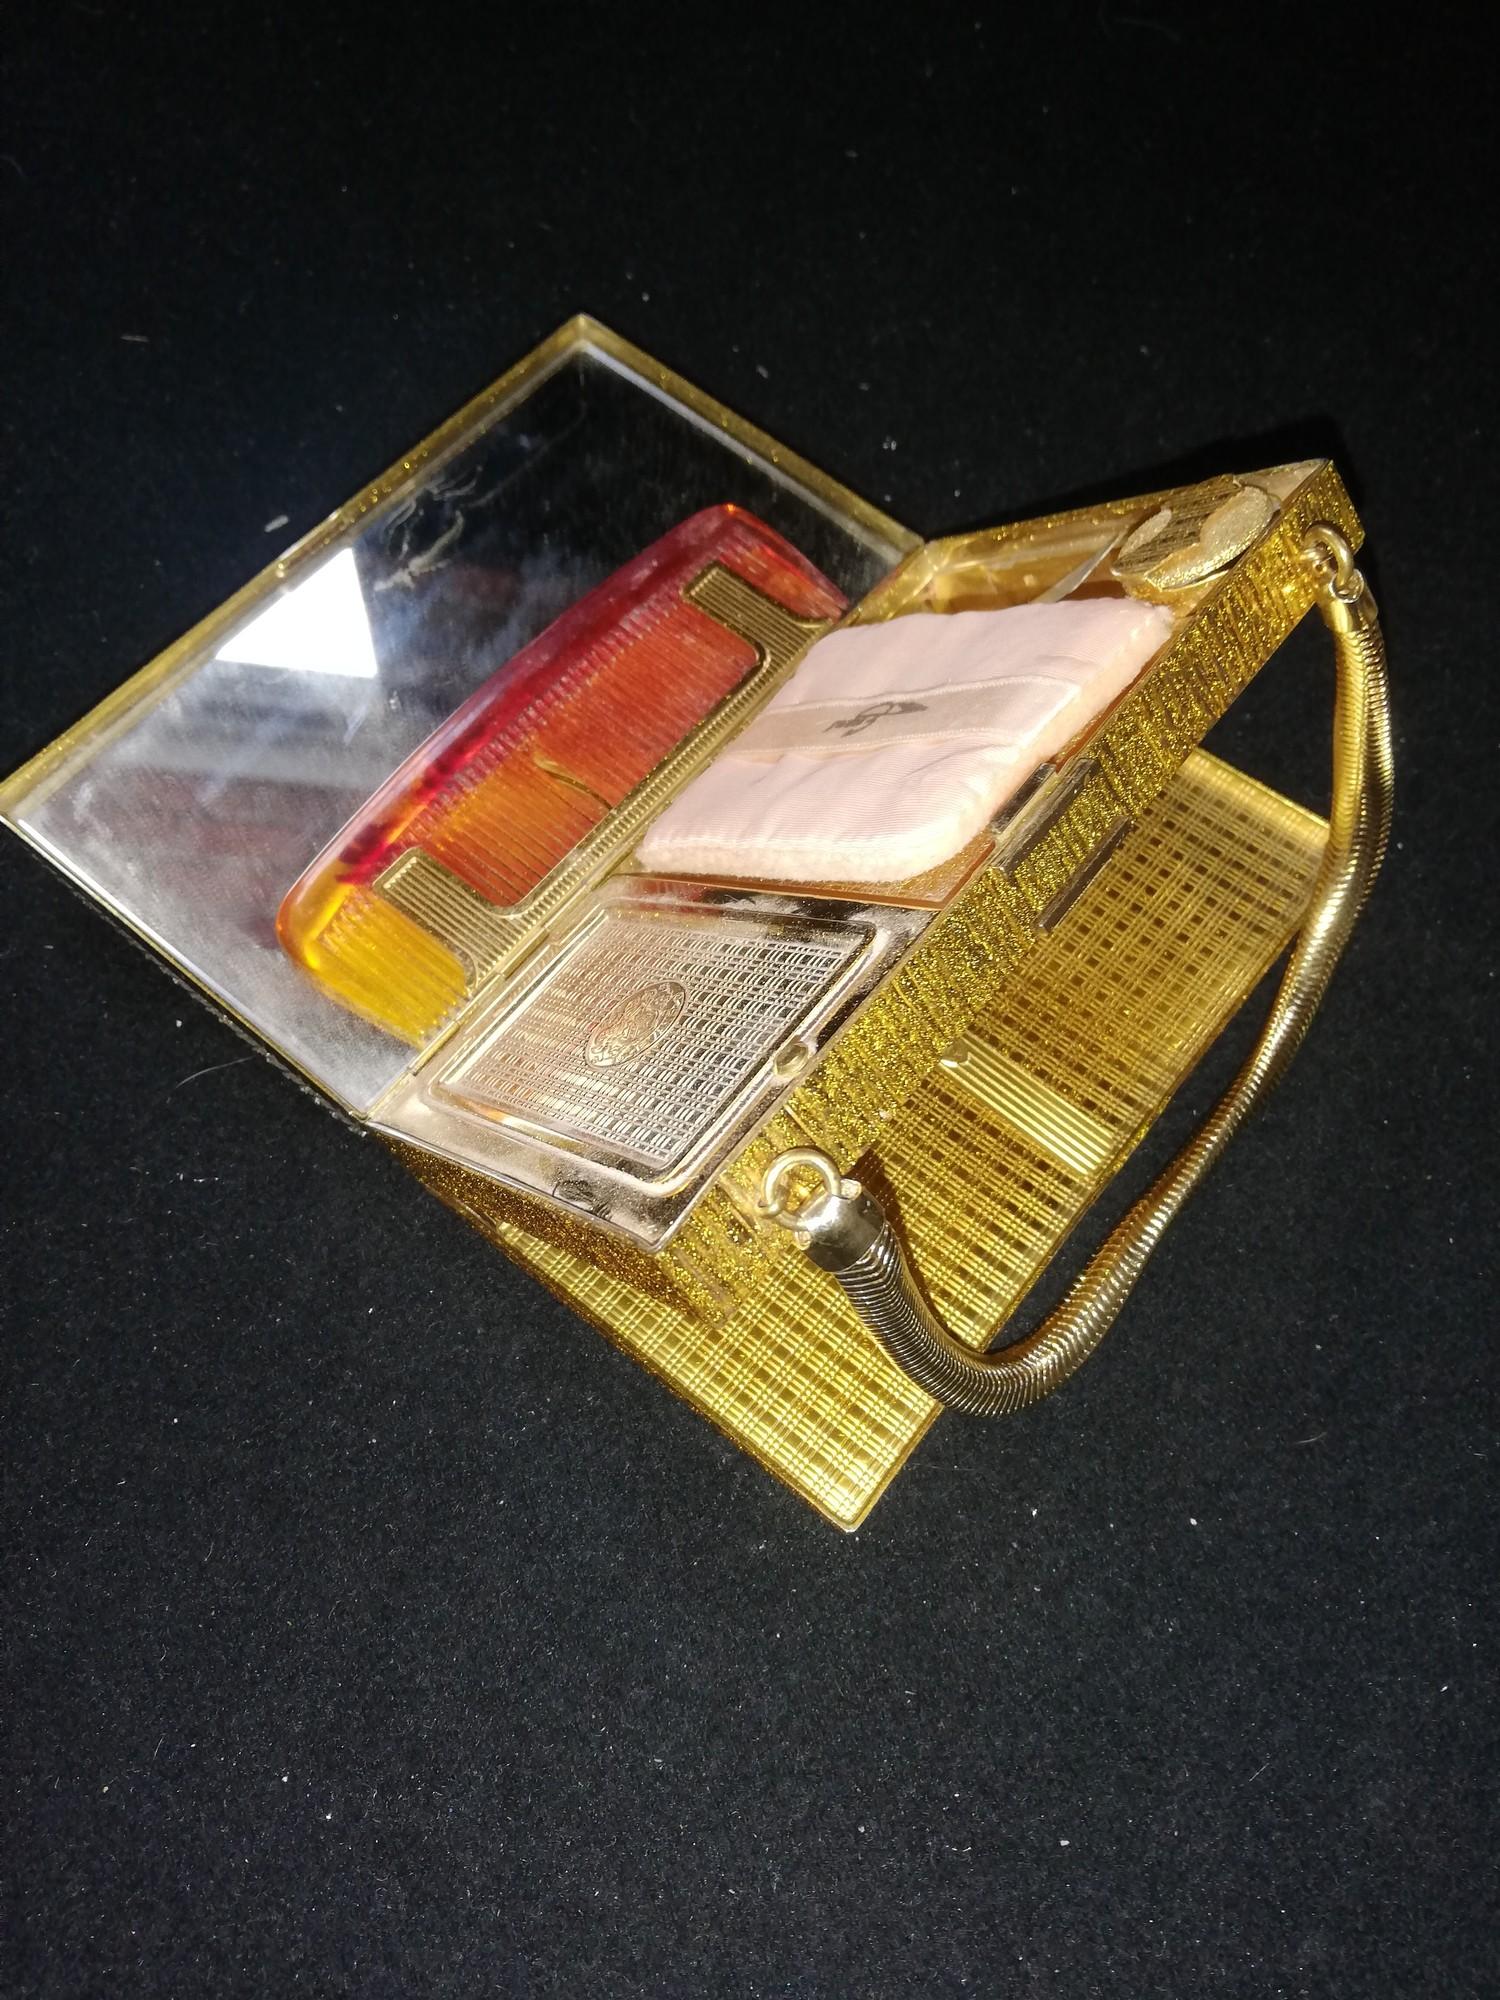 1950's American 2 part vanity case / carryall made from gilt metal & set with pink stones and pearls - Image 2 of 2